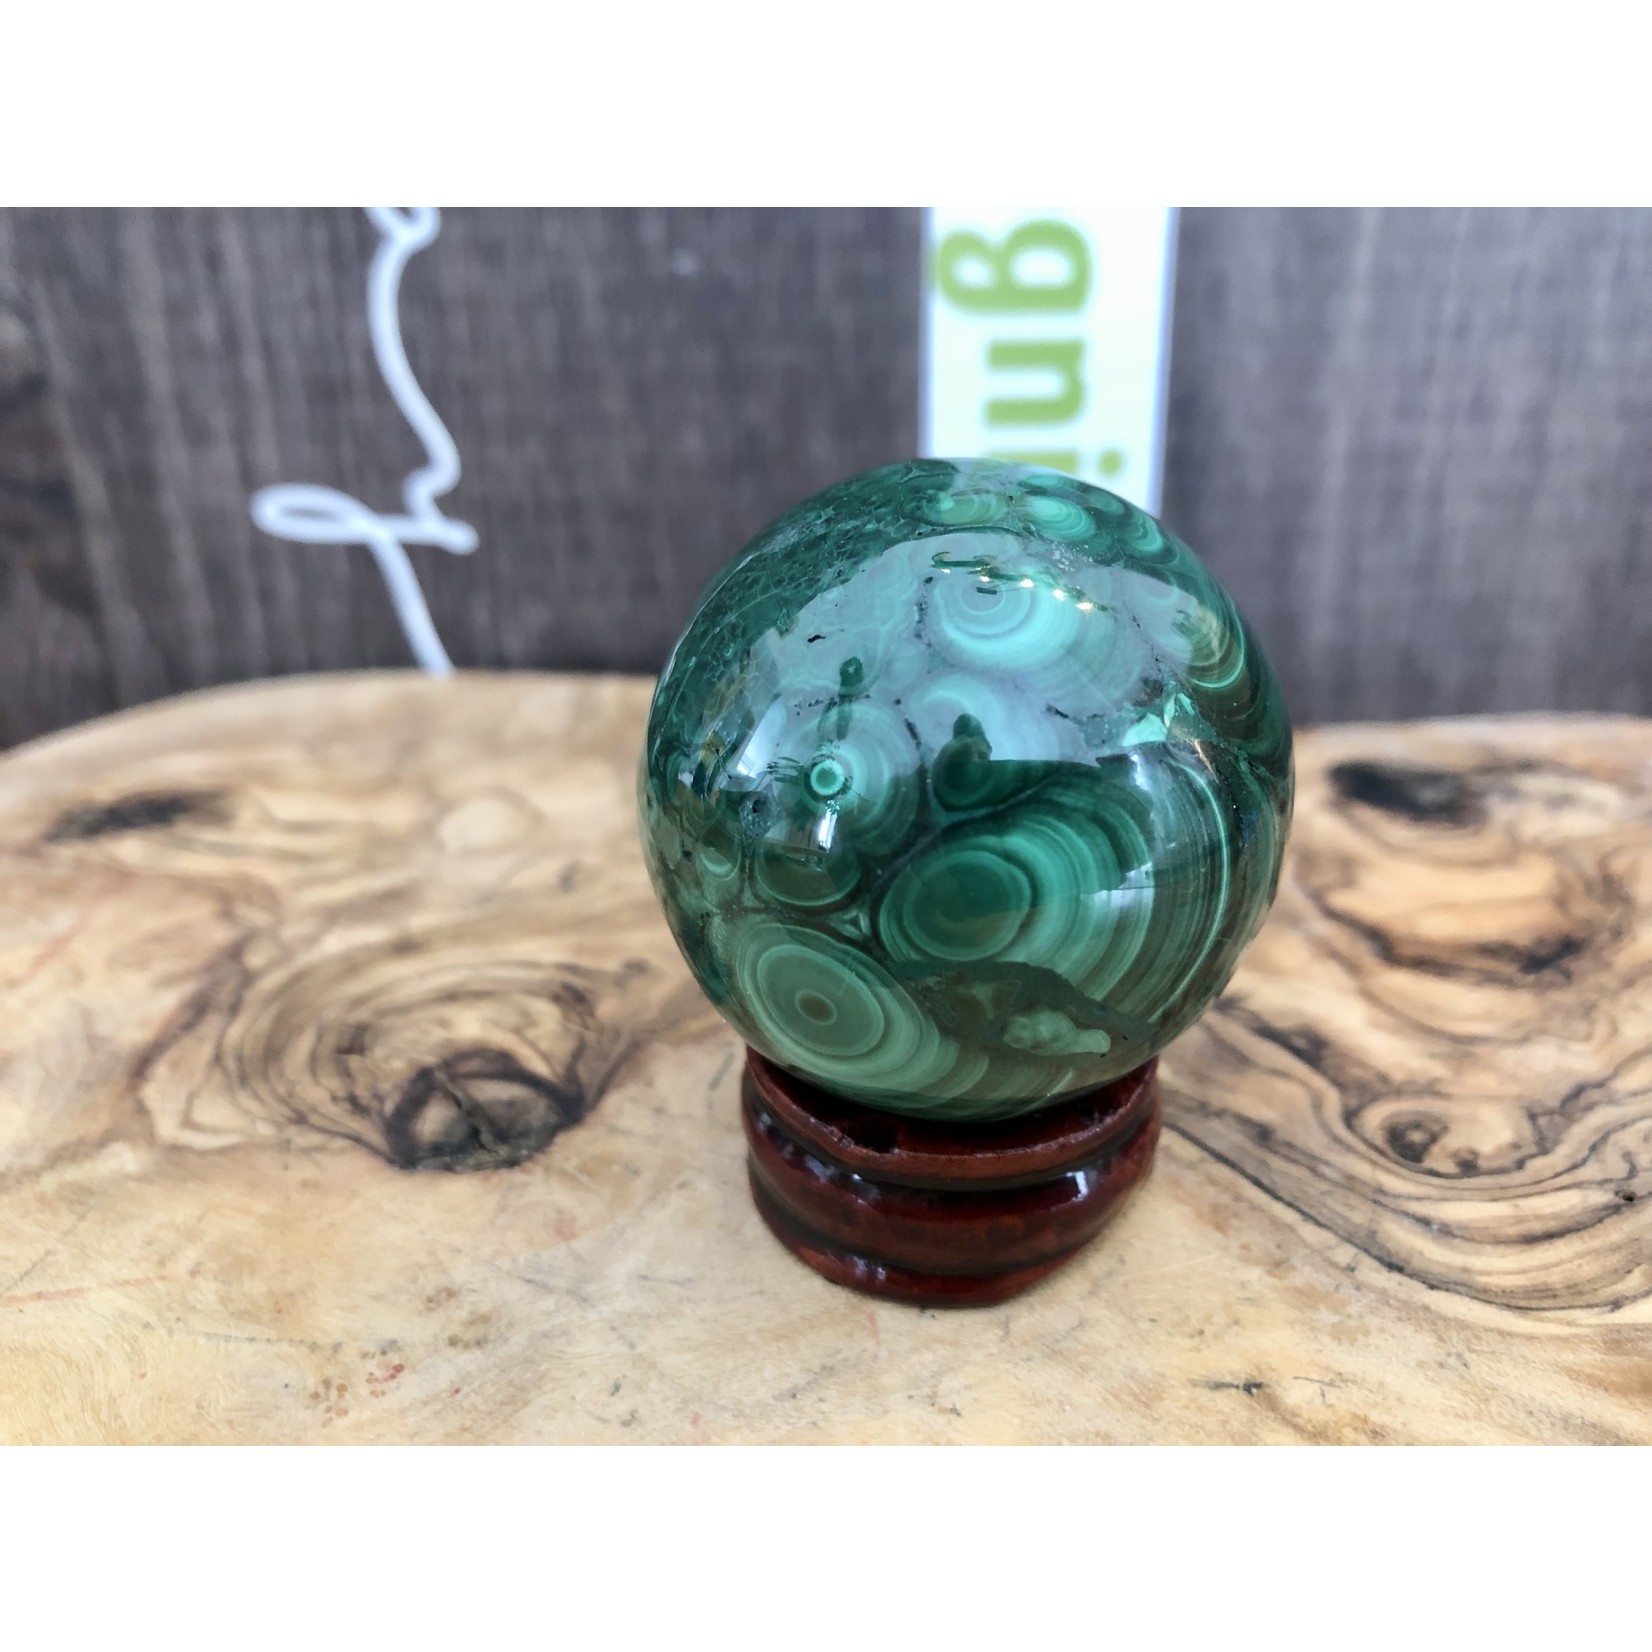 perfect dark malachite sphere, malachite is a stone linked to the heart chakra, it harmonizes our emotions and improves our relationships